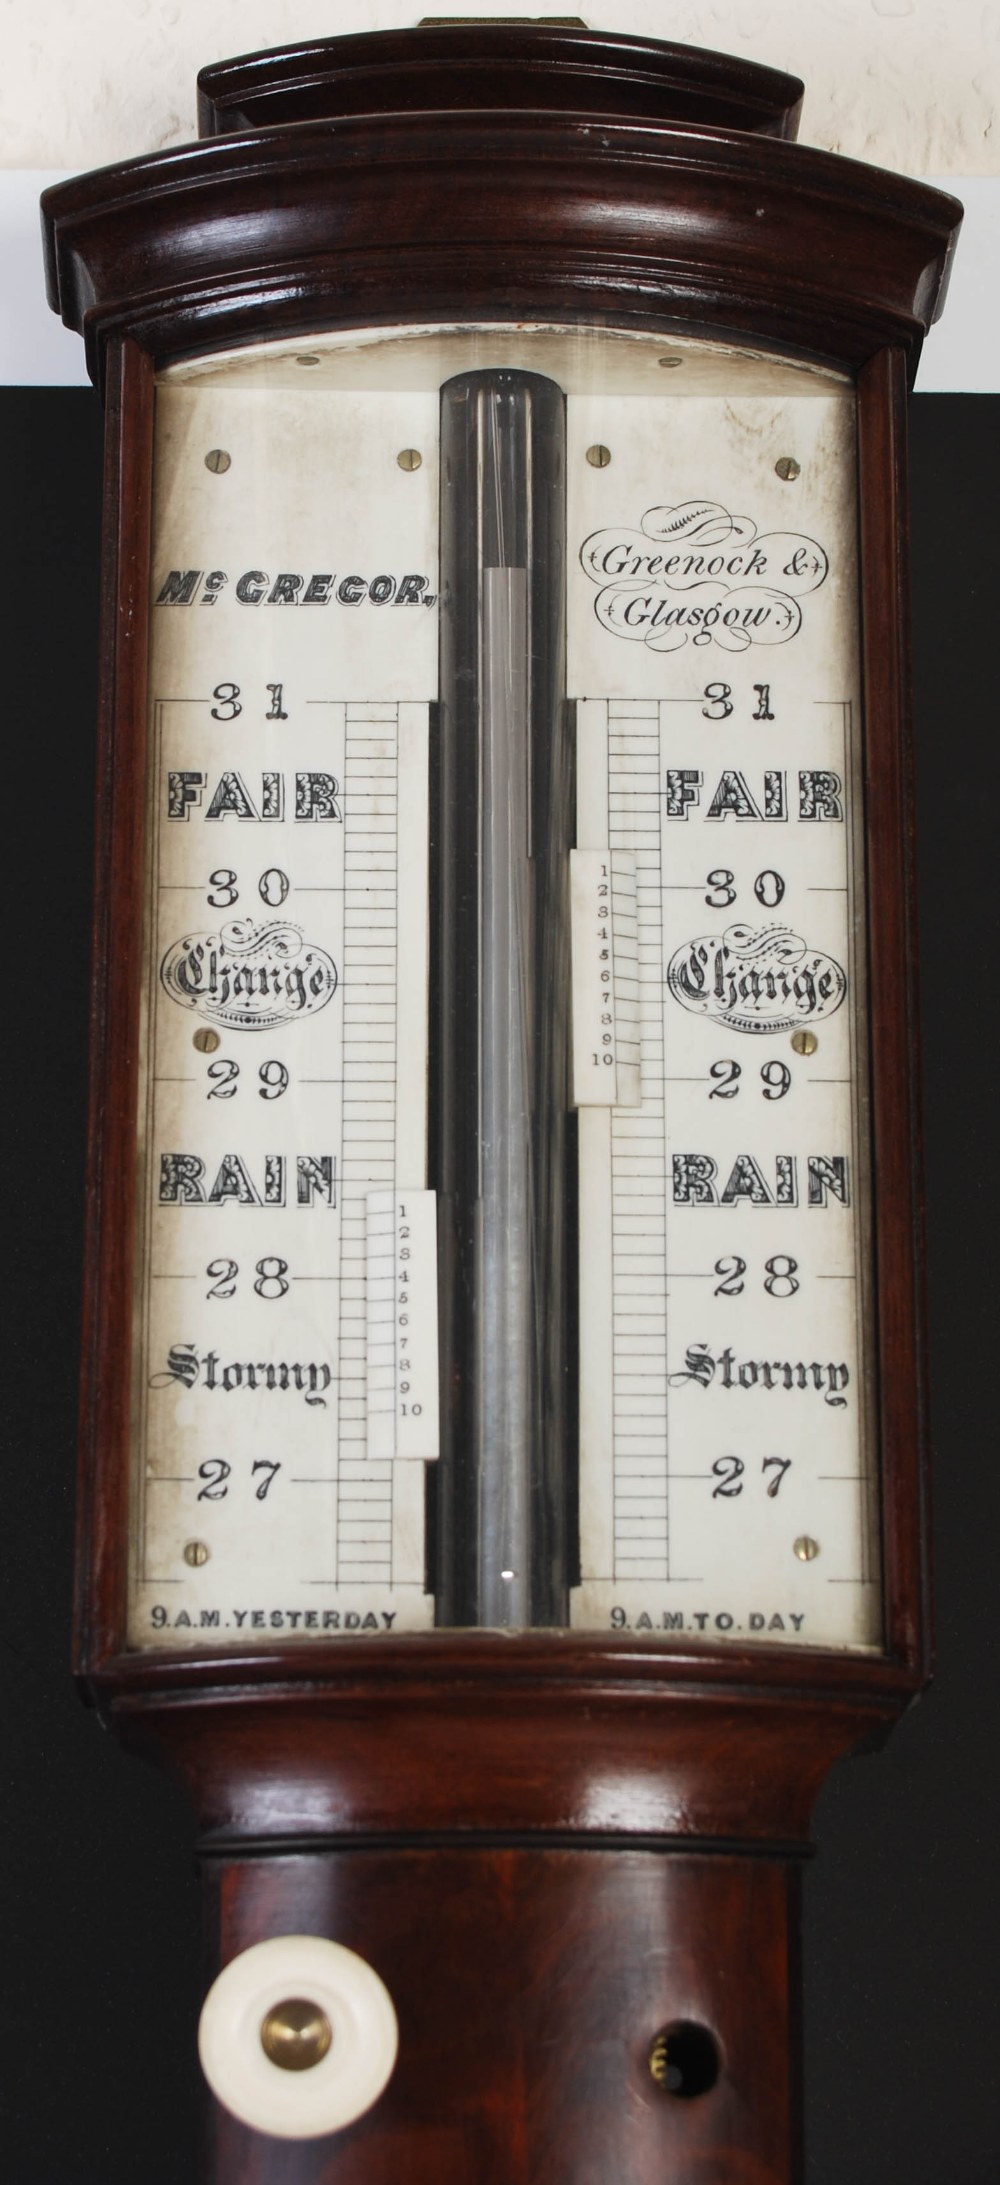 A 19th century mahogany and ebony lined stick barometer, MCGREGOR, GREENOCK & GLASGOW, with - Image 3 of 6